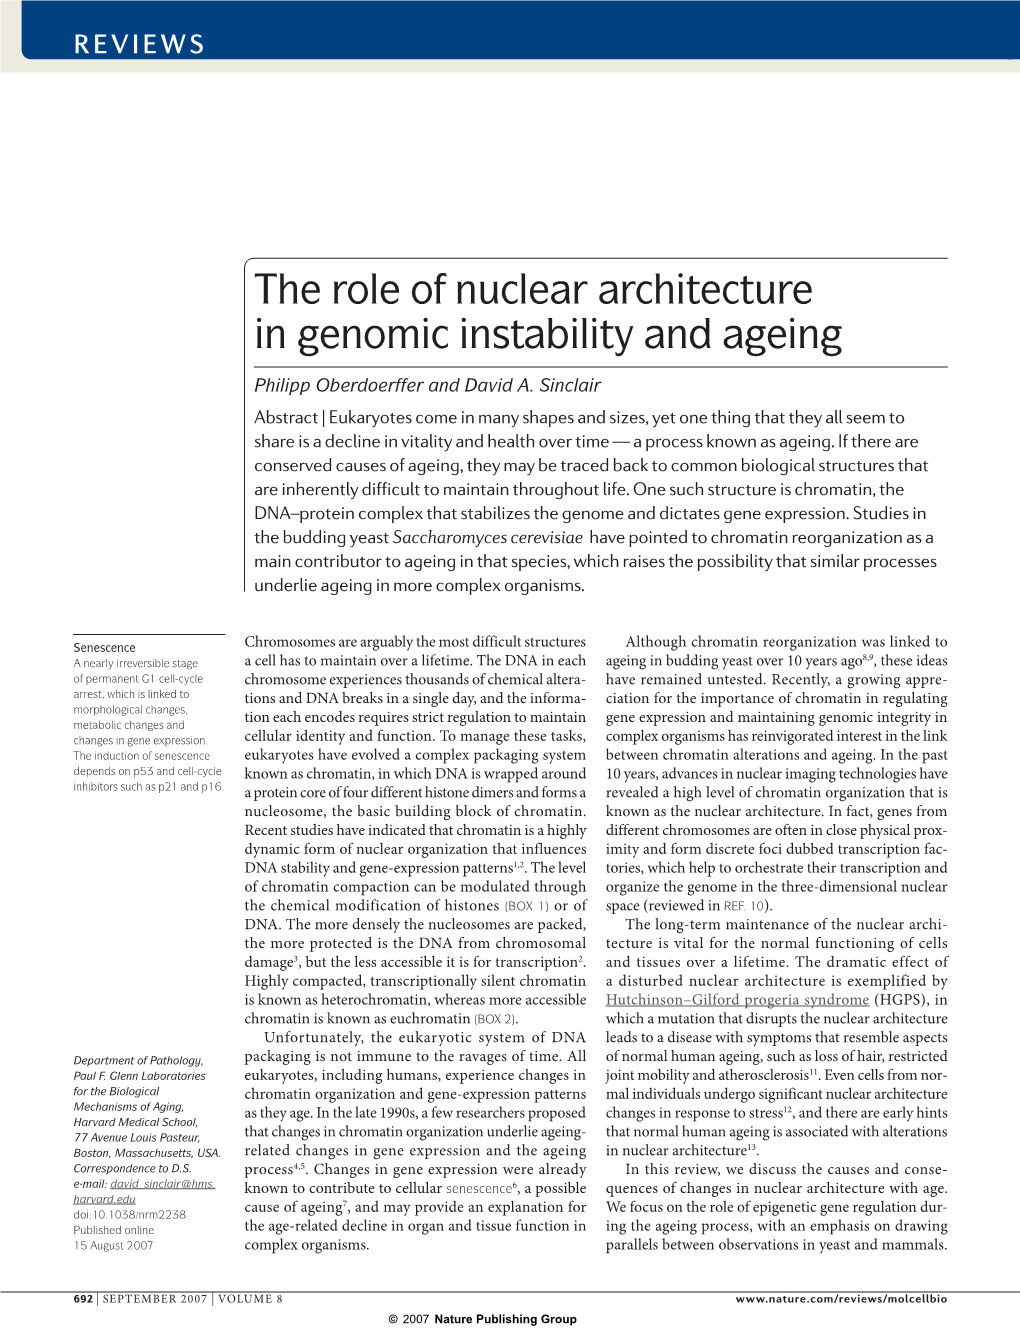 The Role of Nuclear Architecture in Genomic Instability and Ageing